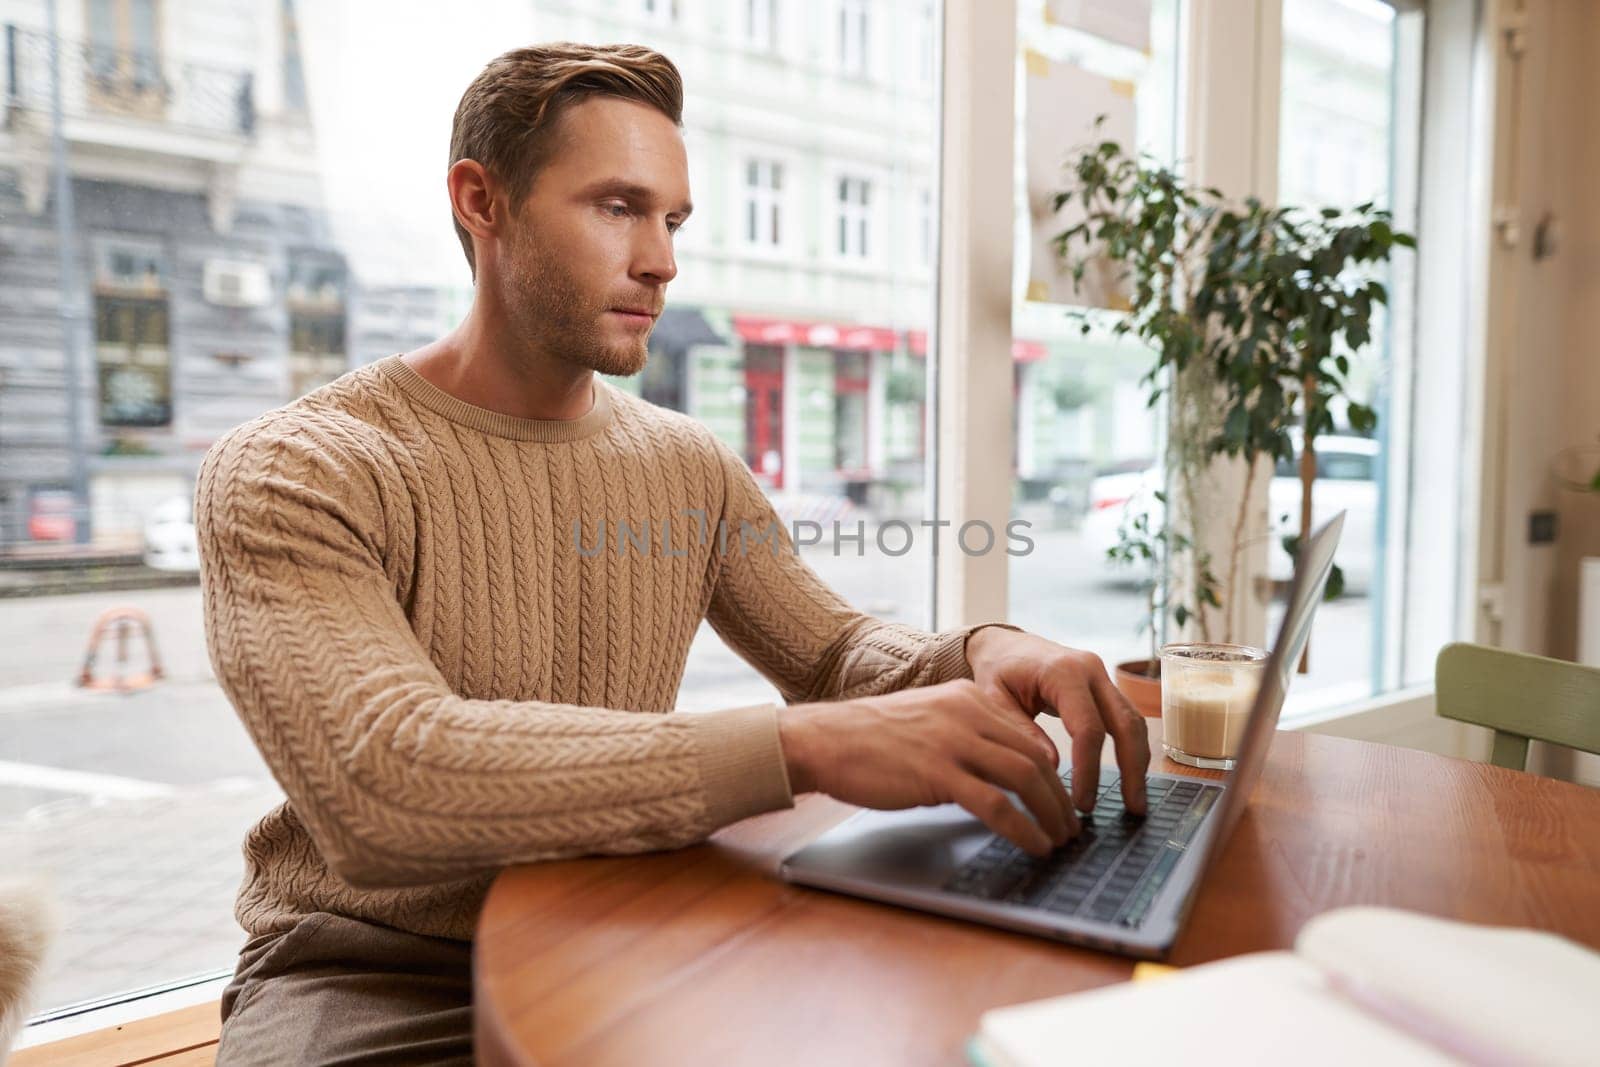 Serious looking cafe owner, handsome man working on laptop, visitor in coffee shop sending an email, typing on his keyboard.